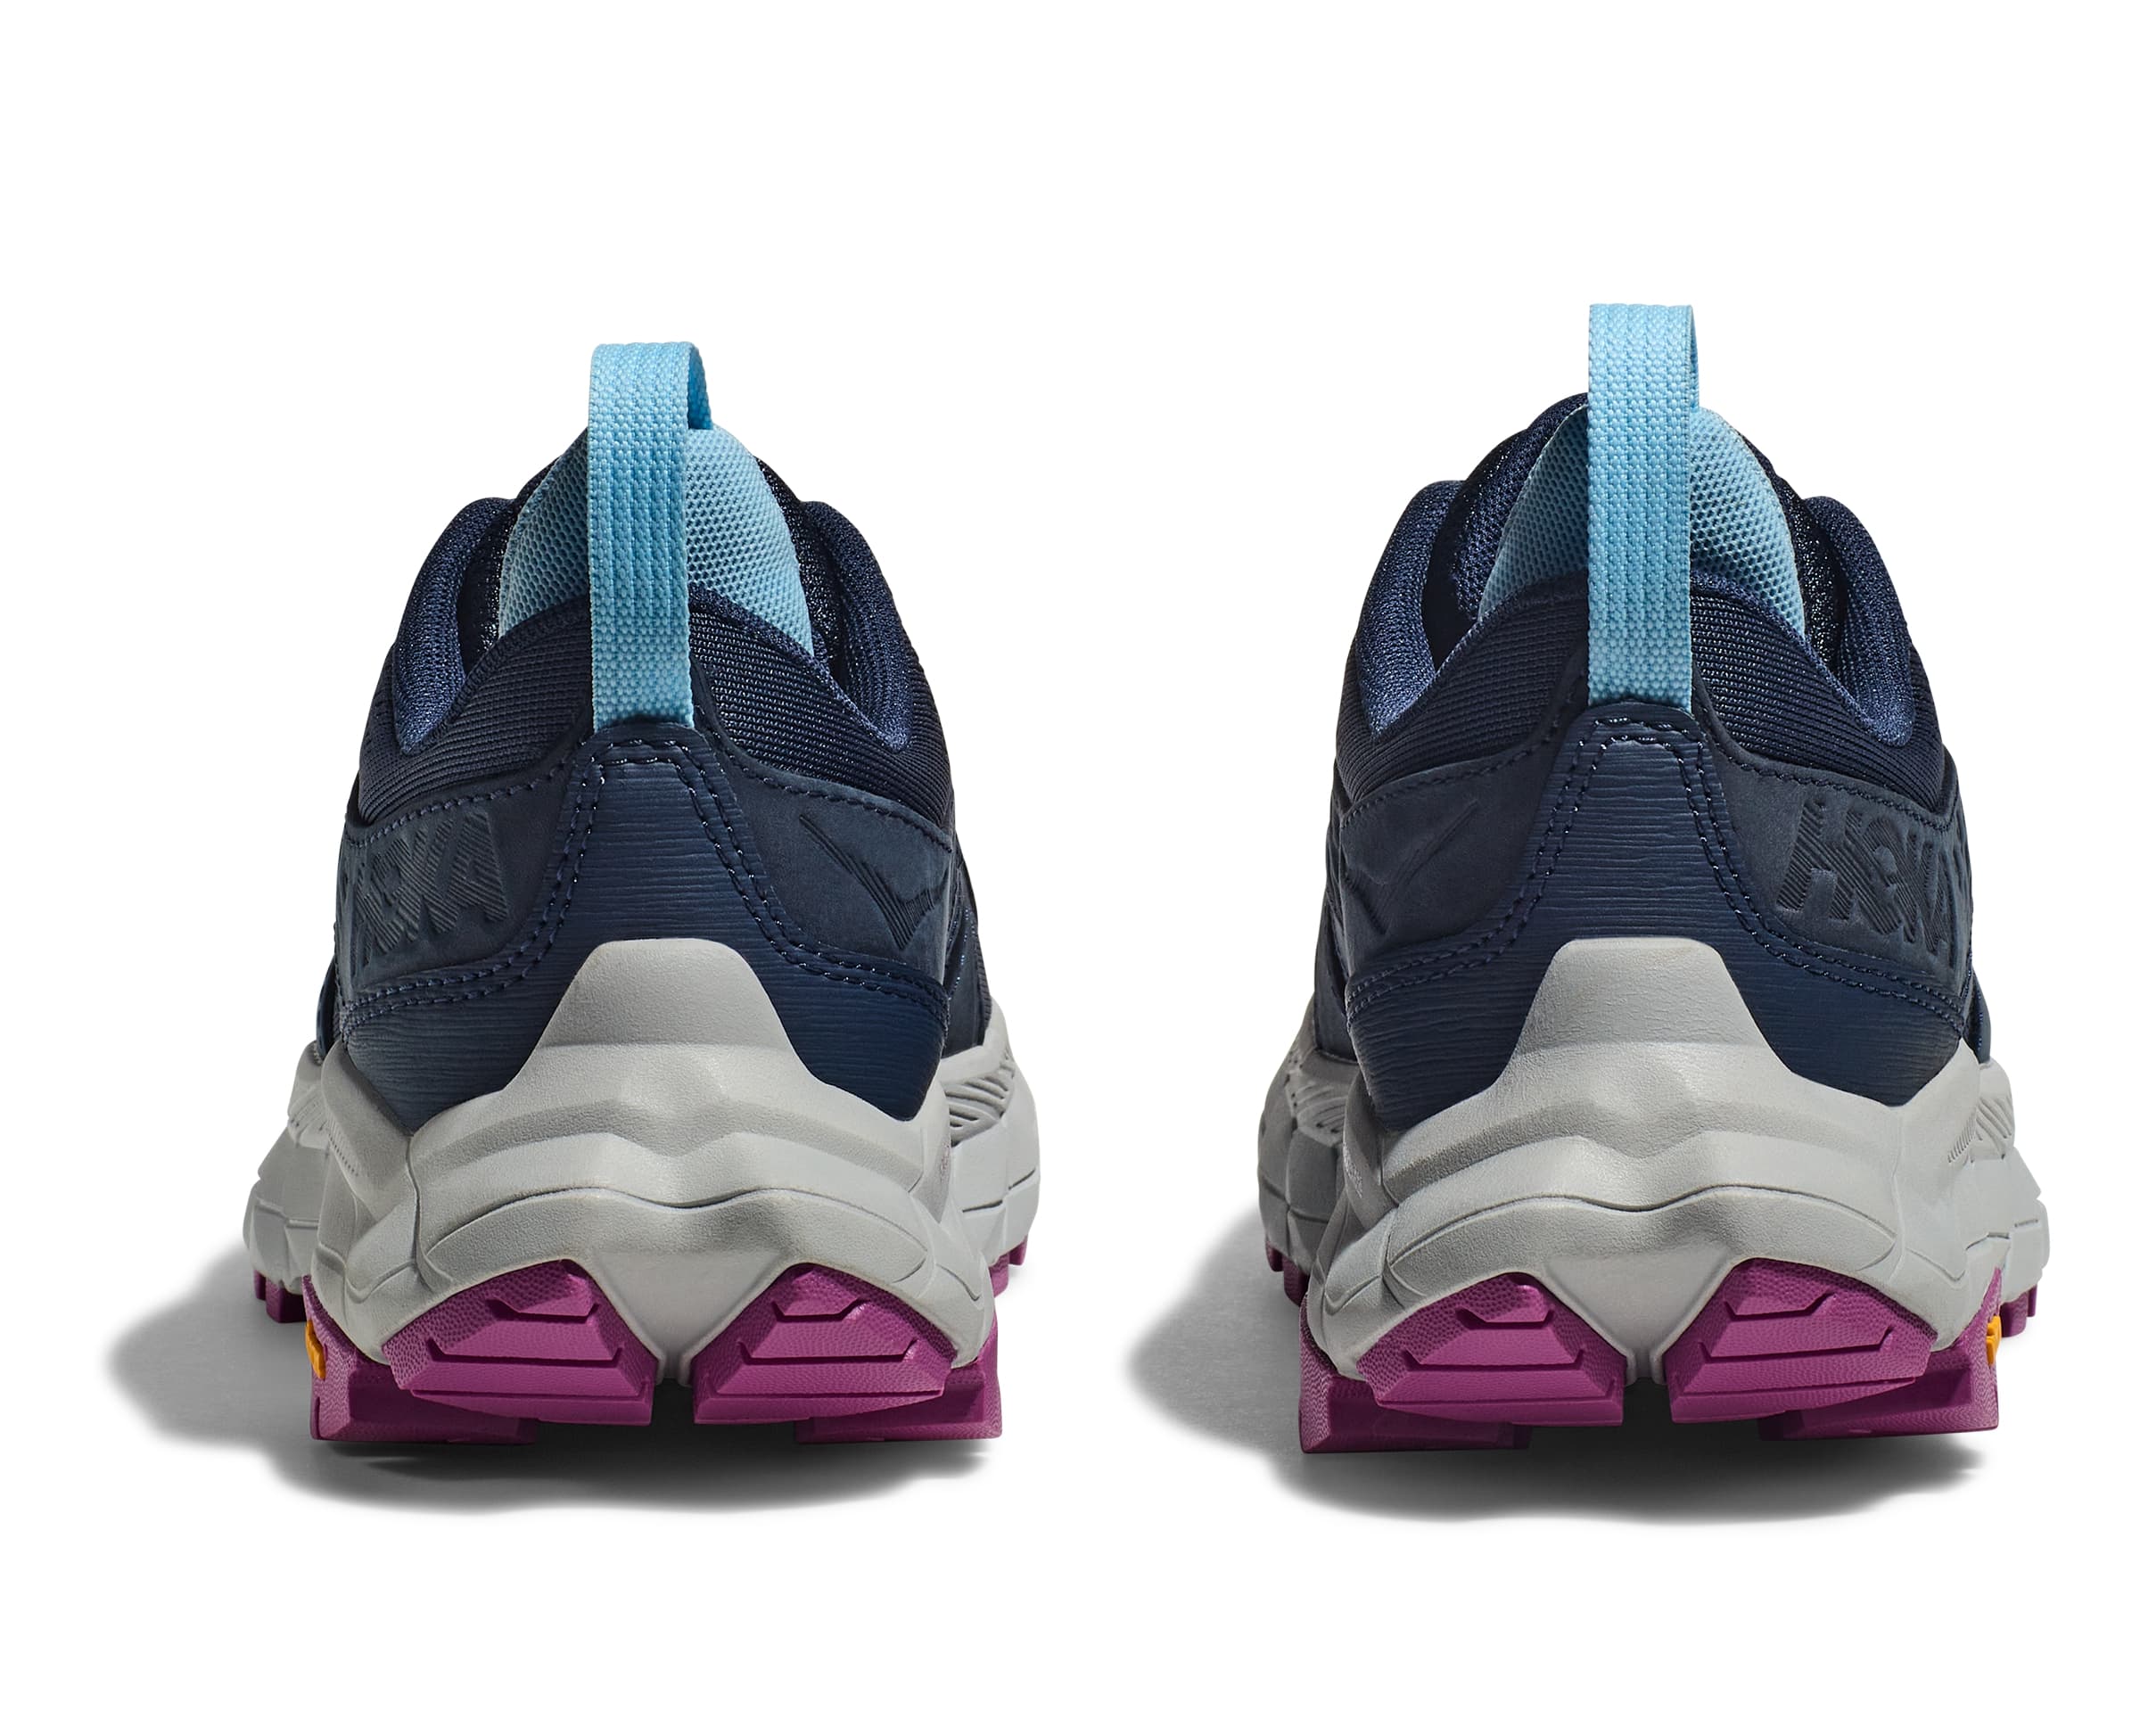 Blue hiking sneaker with grey midsole and purple sole